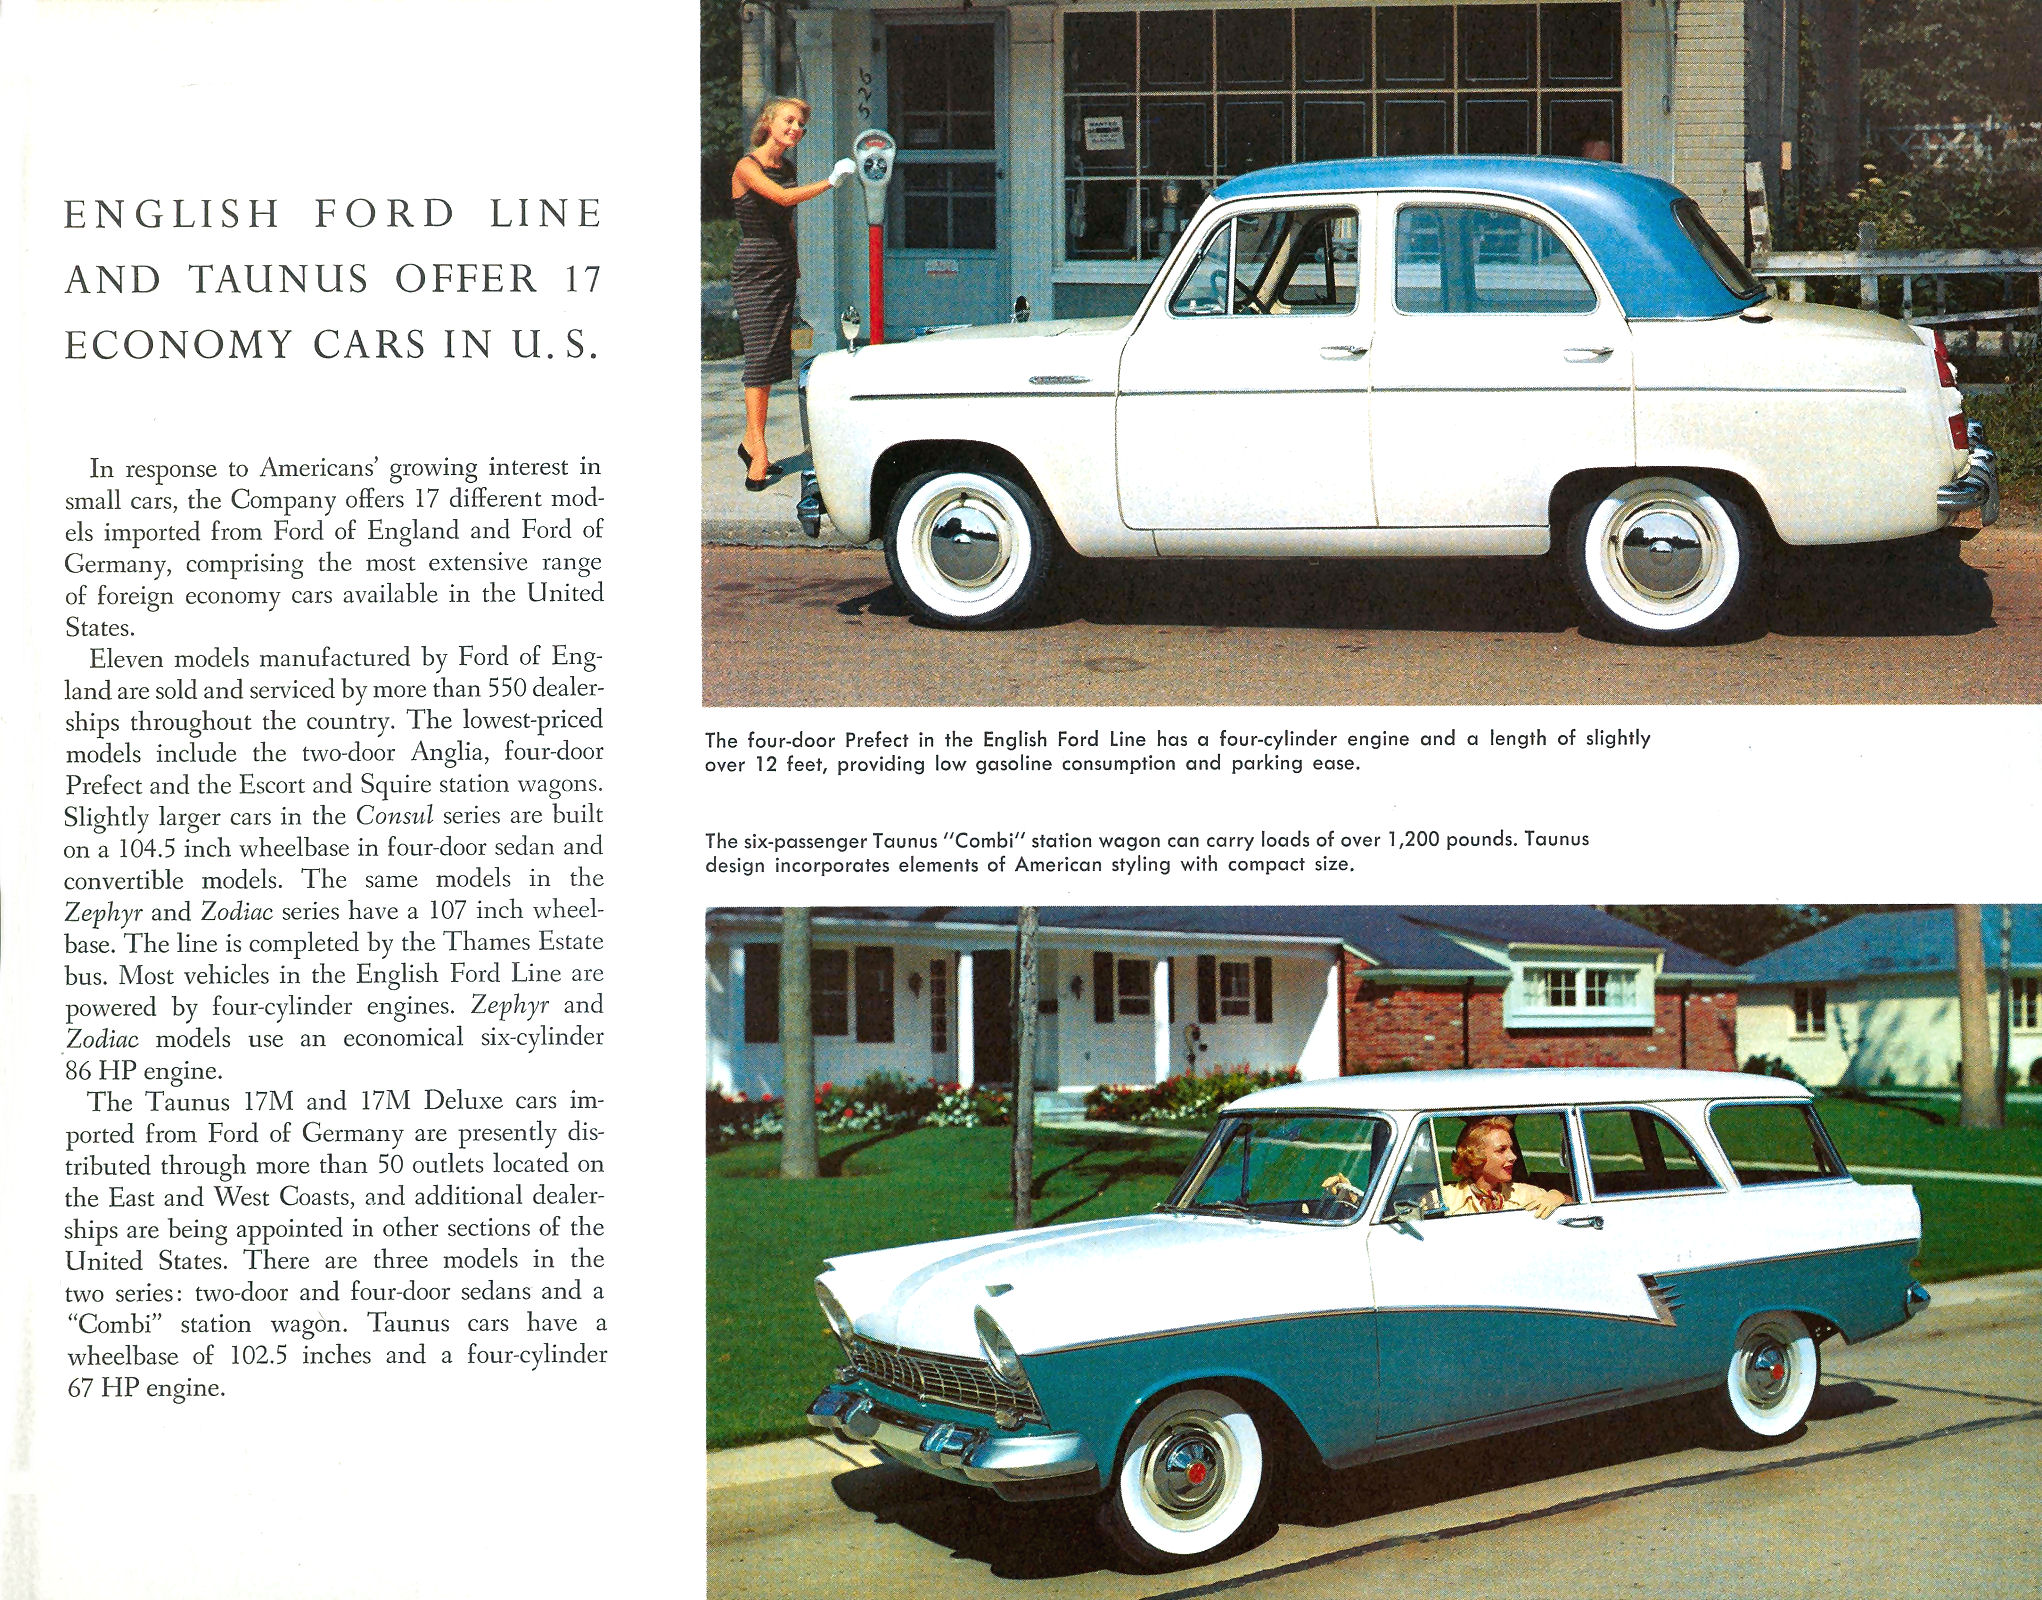 1959 Ford Family of Fine Cars-15